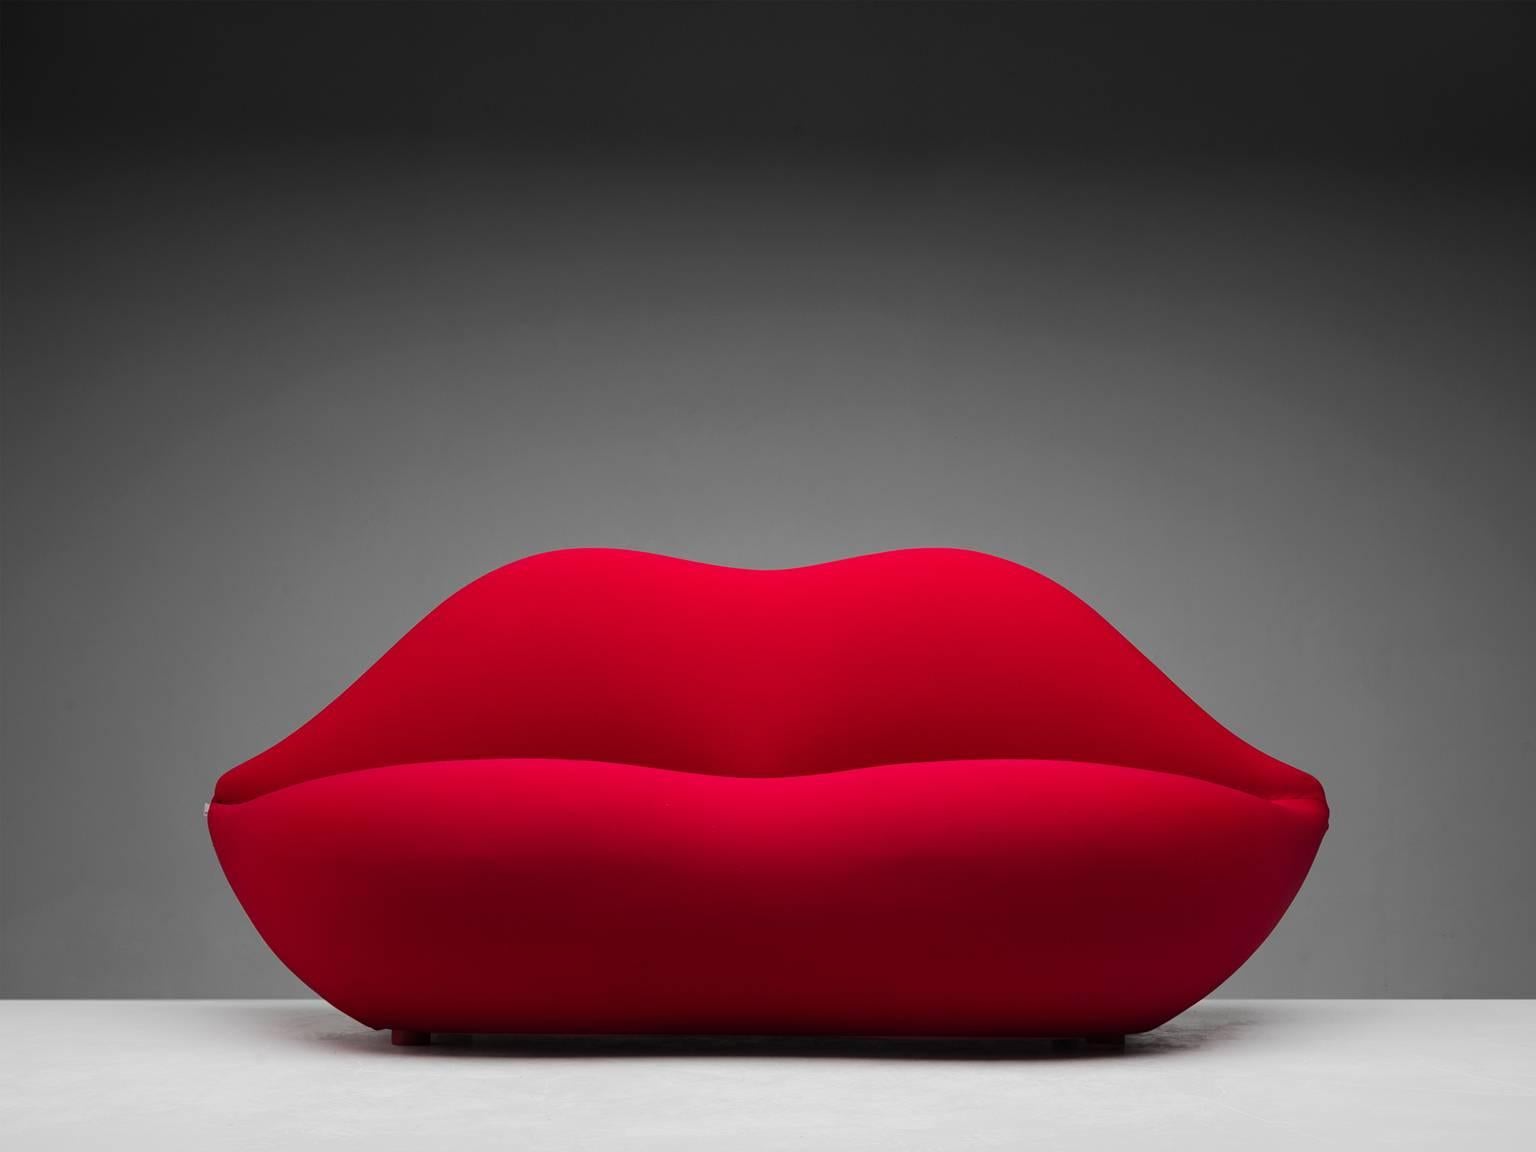 Sofa, fabric, metal frame, foam by Studio65, Italy, 1972. Paying homage to Marilyn Monroe and Salvador Dali.

This settee is executed in fabric and is large enough to sit two people. The Studio 65 Bocca Lip Sofa by Gufram is an icon of postmodern